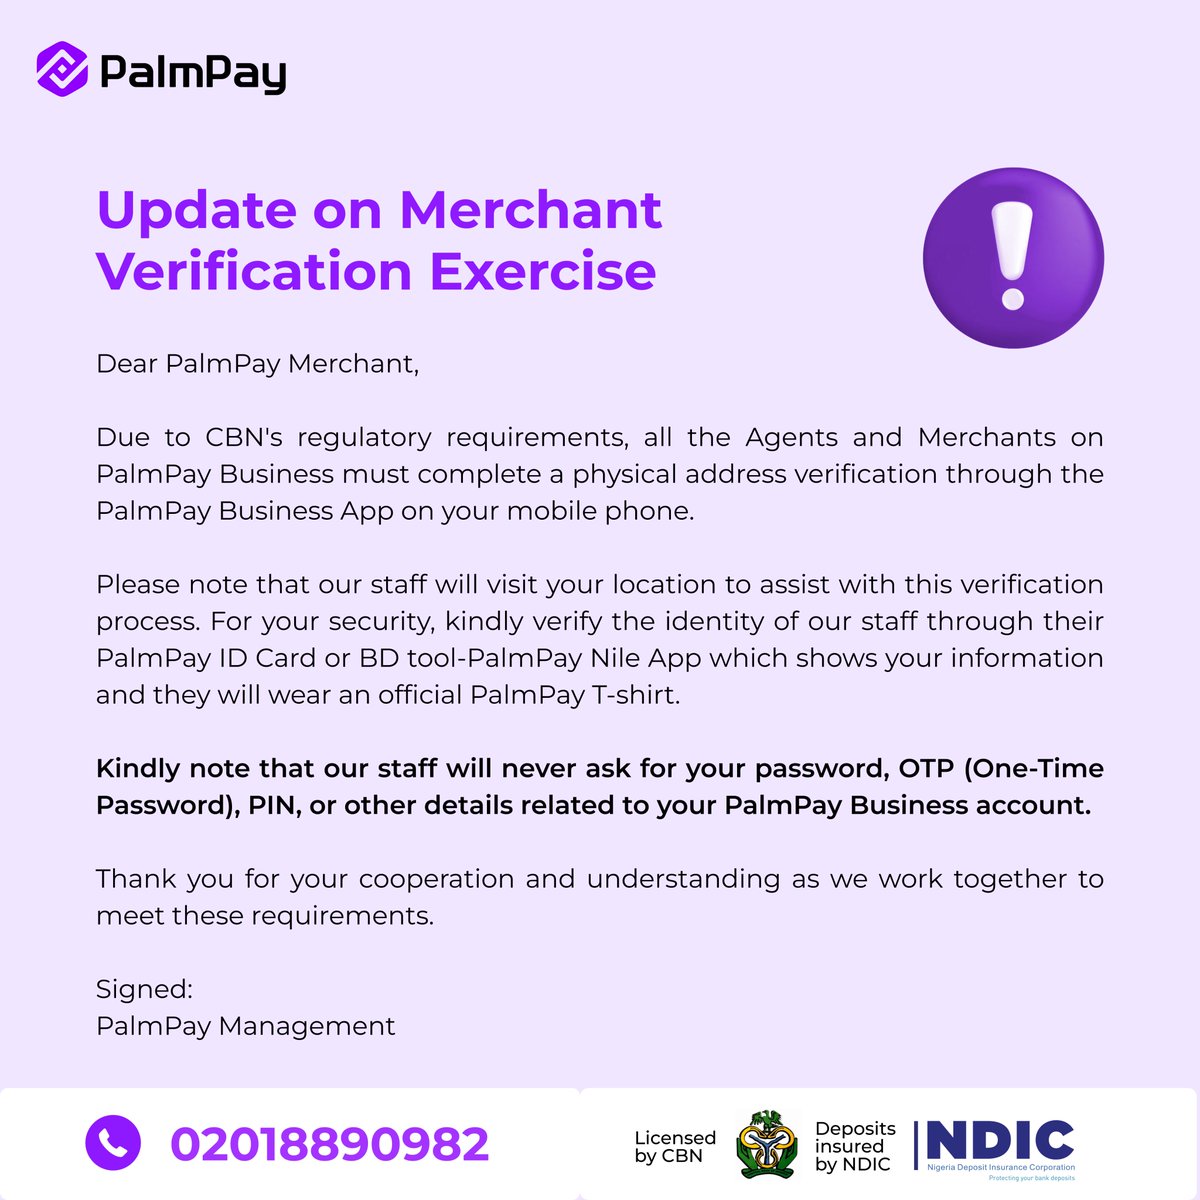 Important Notice!  

In line with CBN requirements, all agents and merchants on PalmPay Business are expected to complete a physical address verification through the PalmPay Business app.  

Note that our staff will be visiting your location to assist you.  

#PalmPay